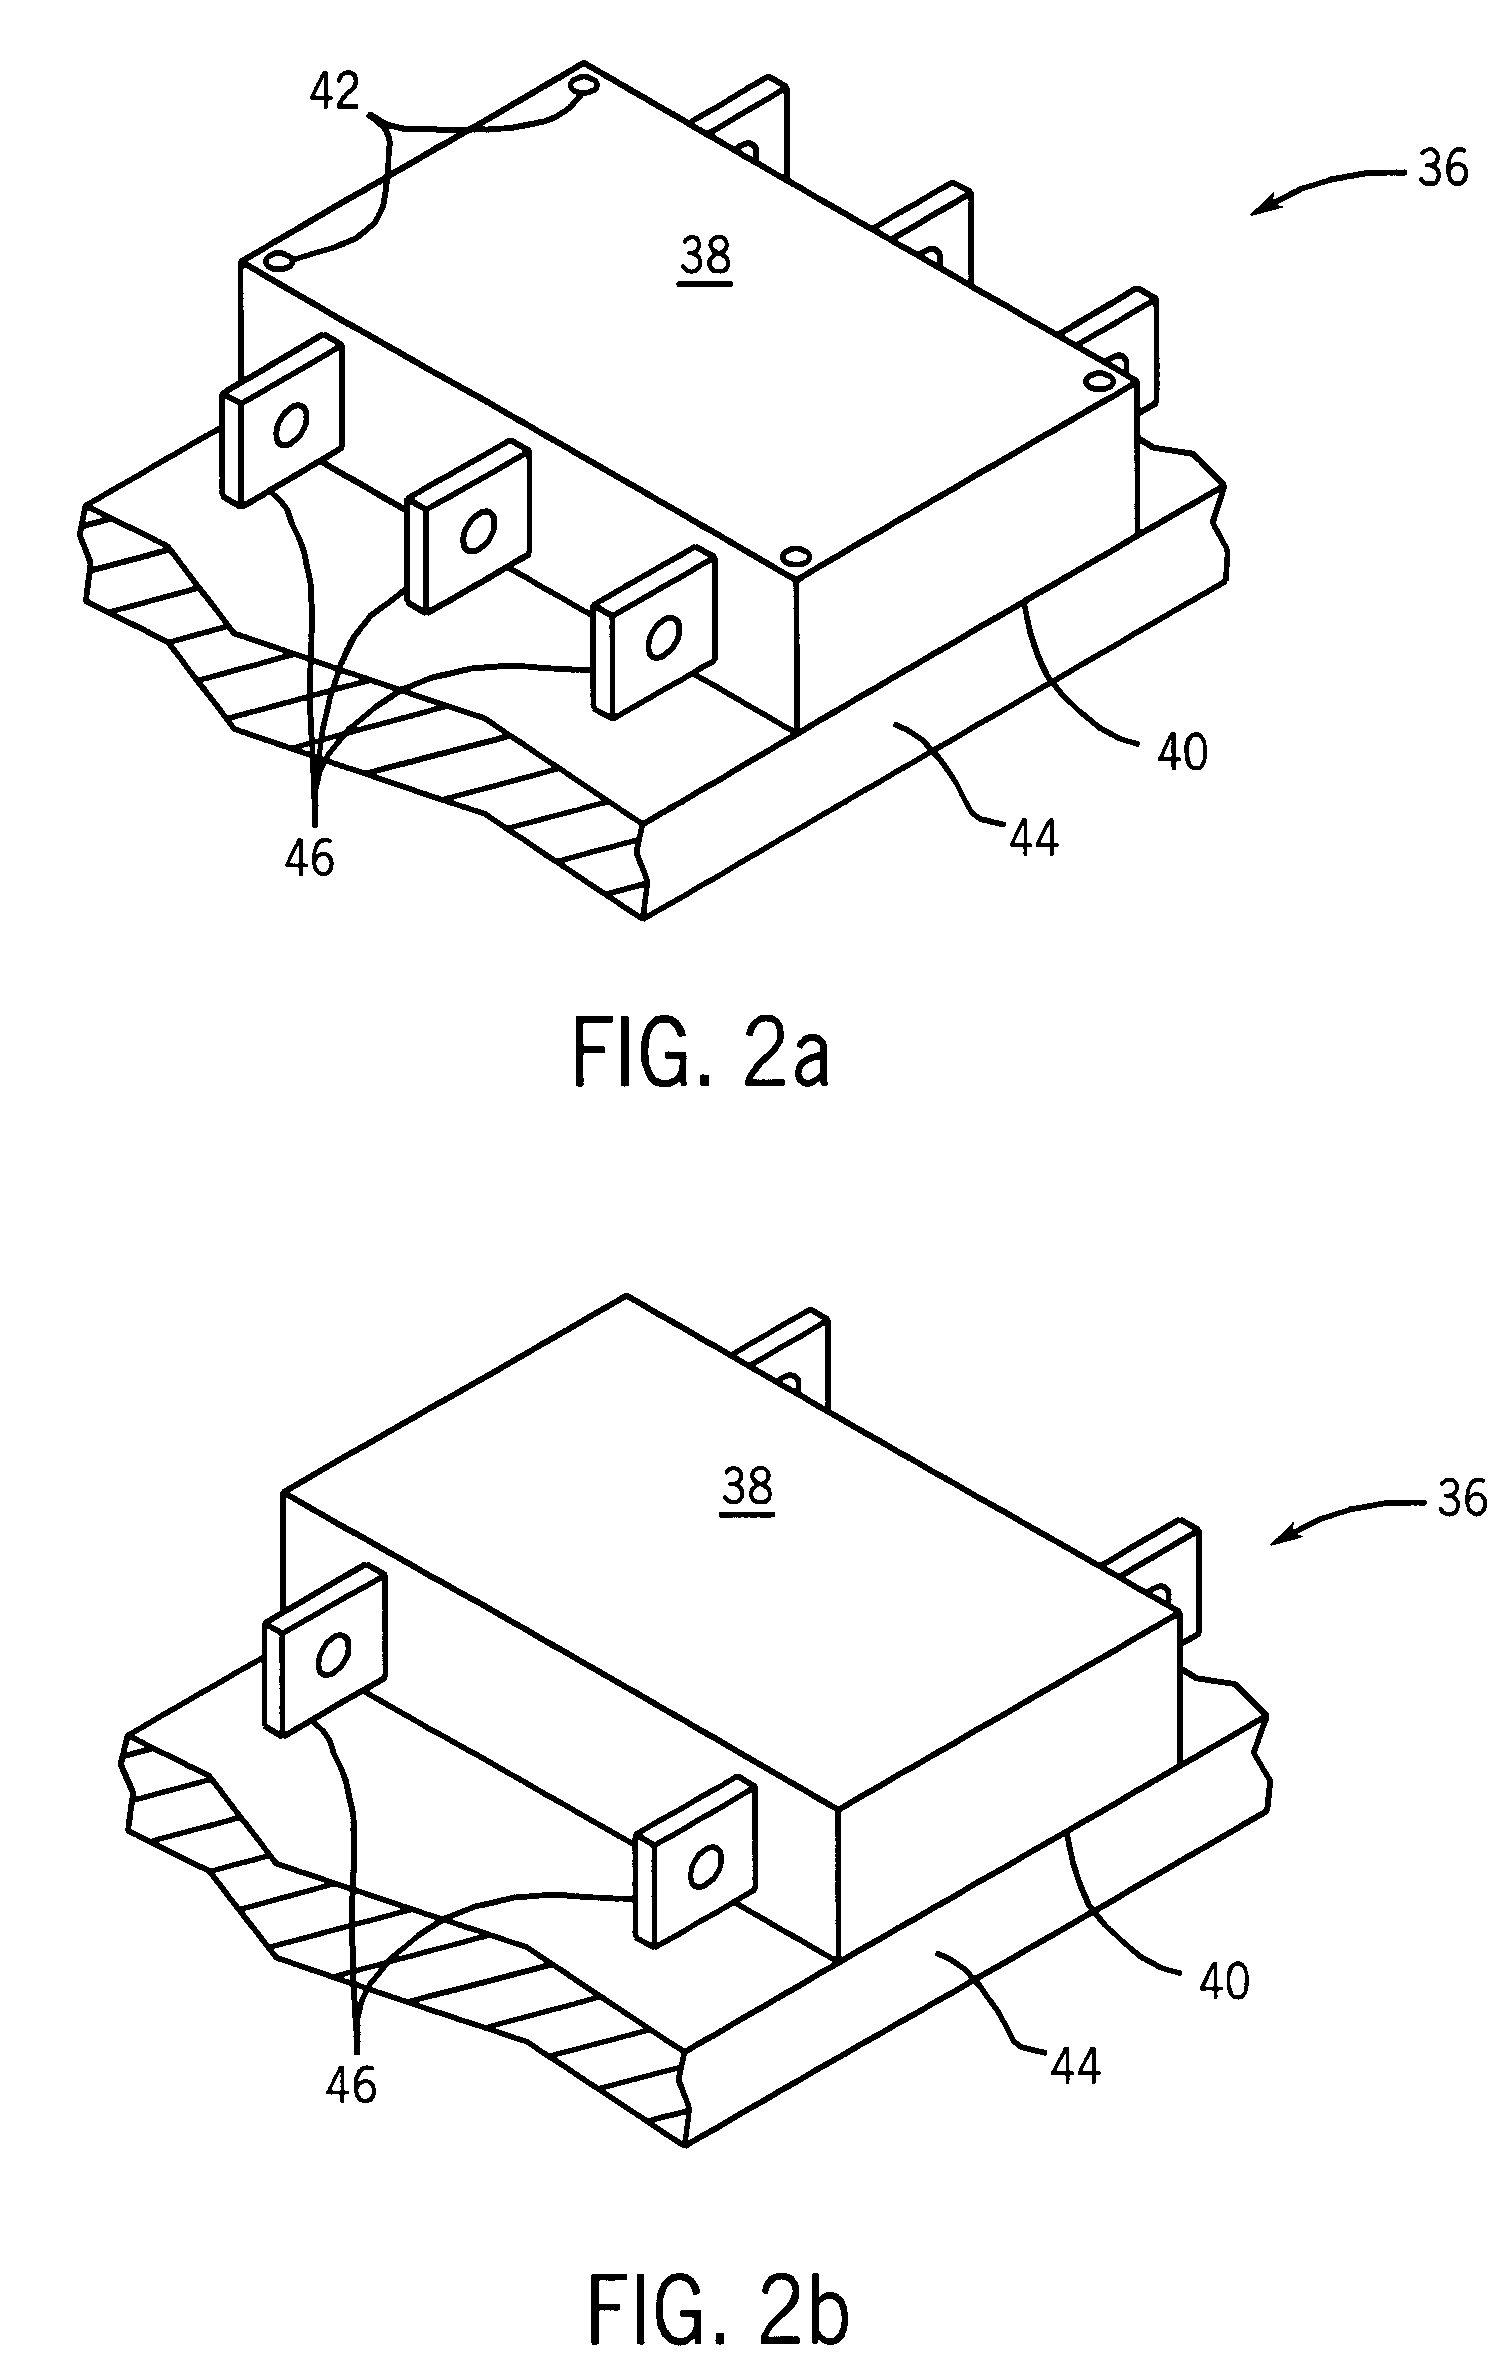 Modular inductor for use in power electronic circuits